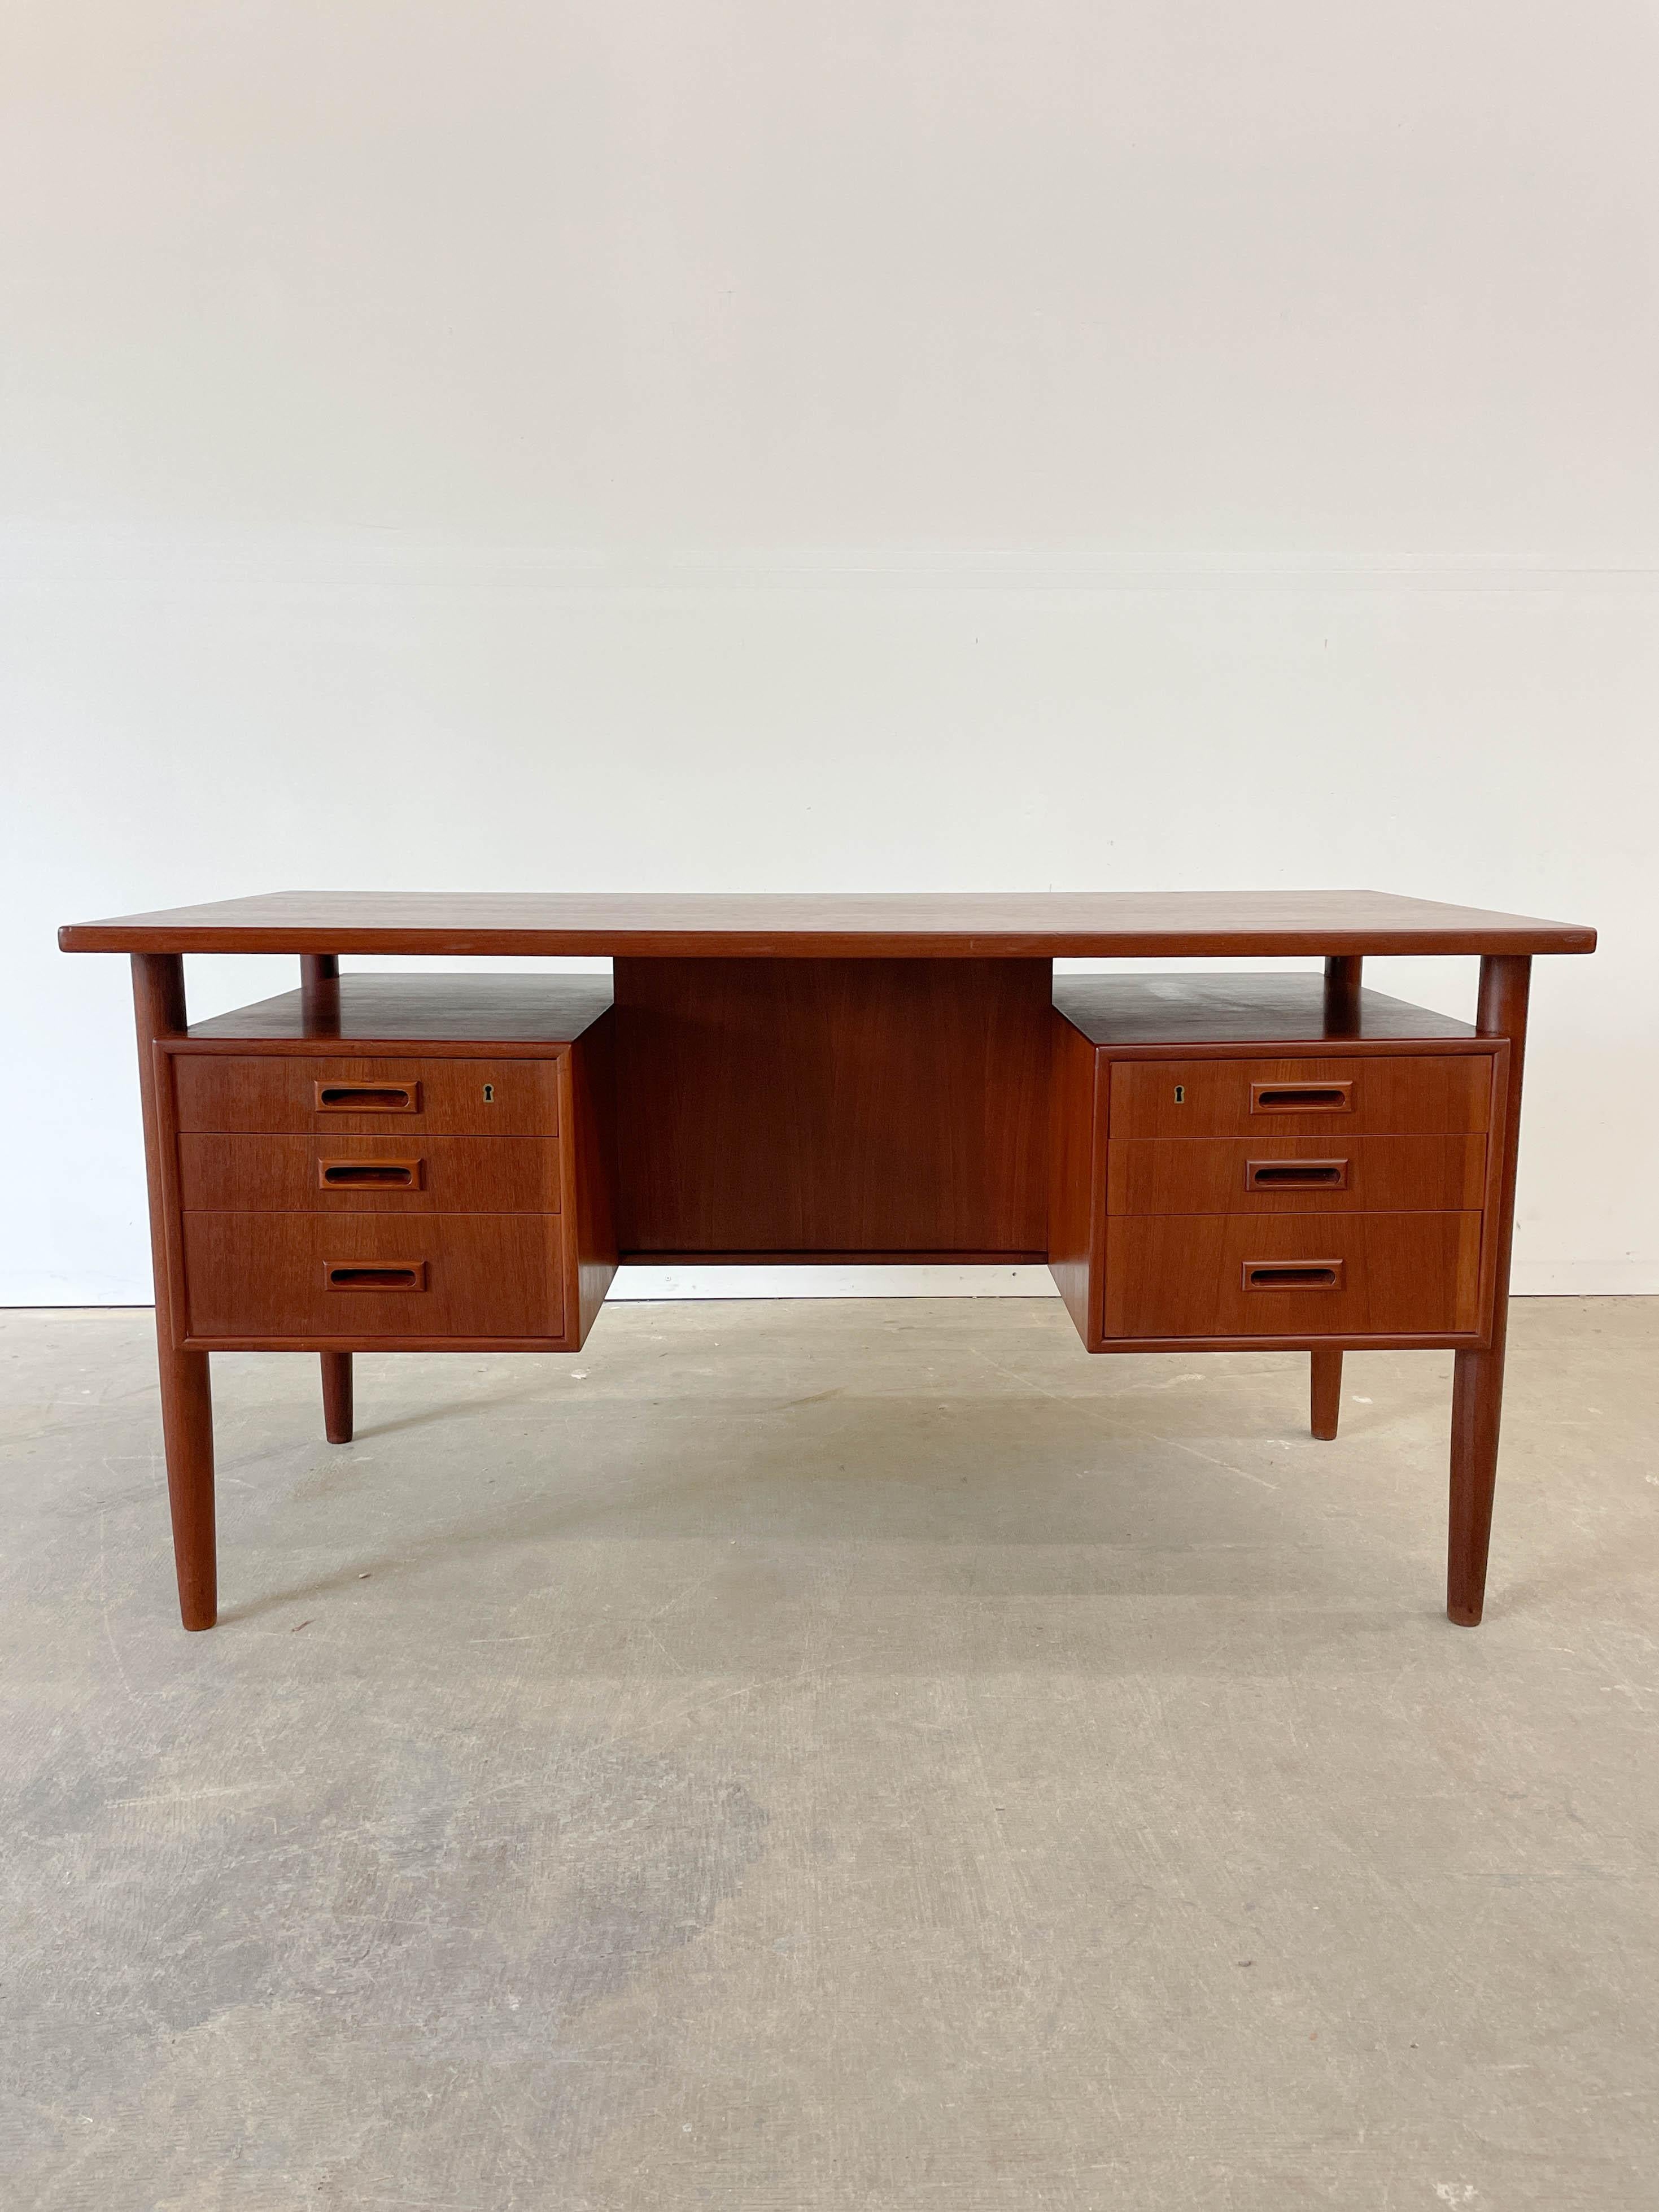 Superbly proportioned Danish teak desk with rear bookshelf and floating pedestals from the 1950s. This design has been attributed to designer Arne Vodder for Sibast by other sellers but we have not found docunmentation for this. Excellent